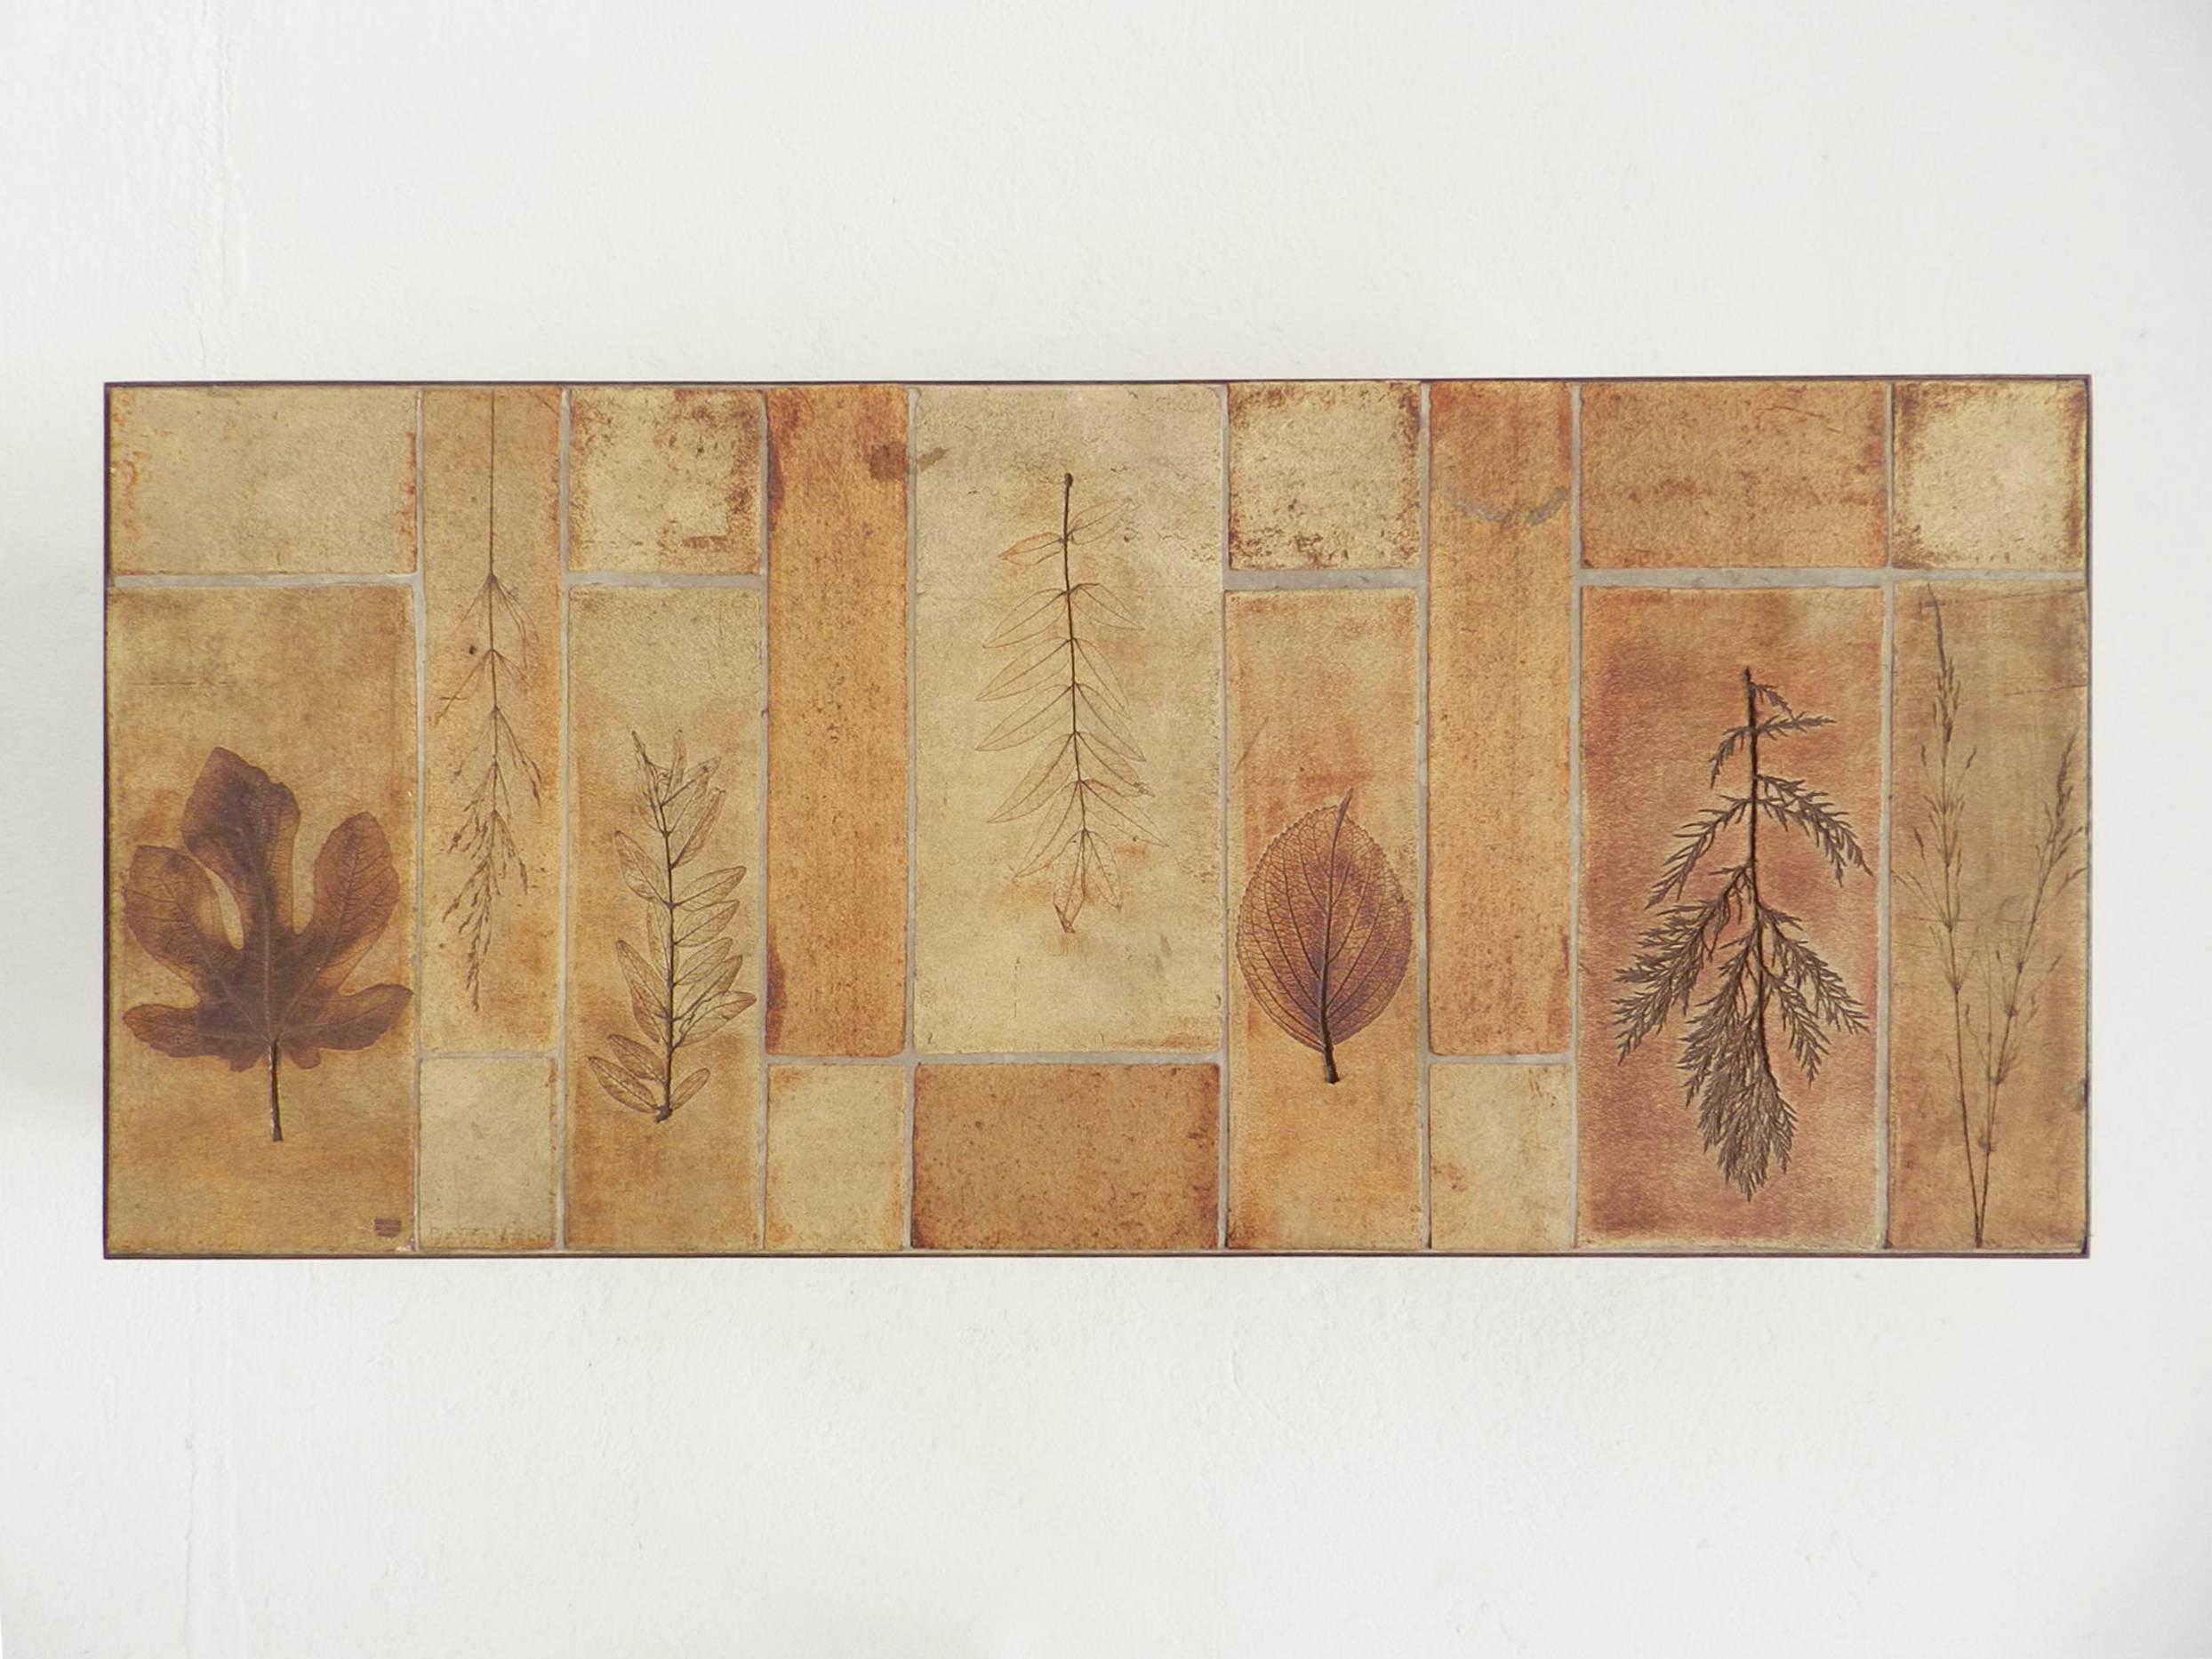 Low table from the Garrigue series by the French master ceramist Roger Capron in Vallauris. Ceramic tiles with an impressed leaves decor and metal frames. Trademark stamped on a glazed tile.